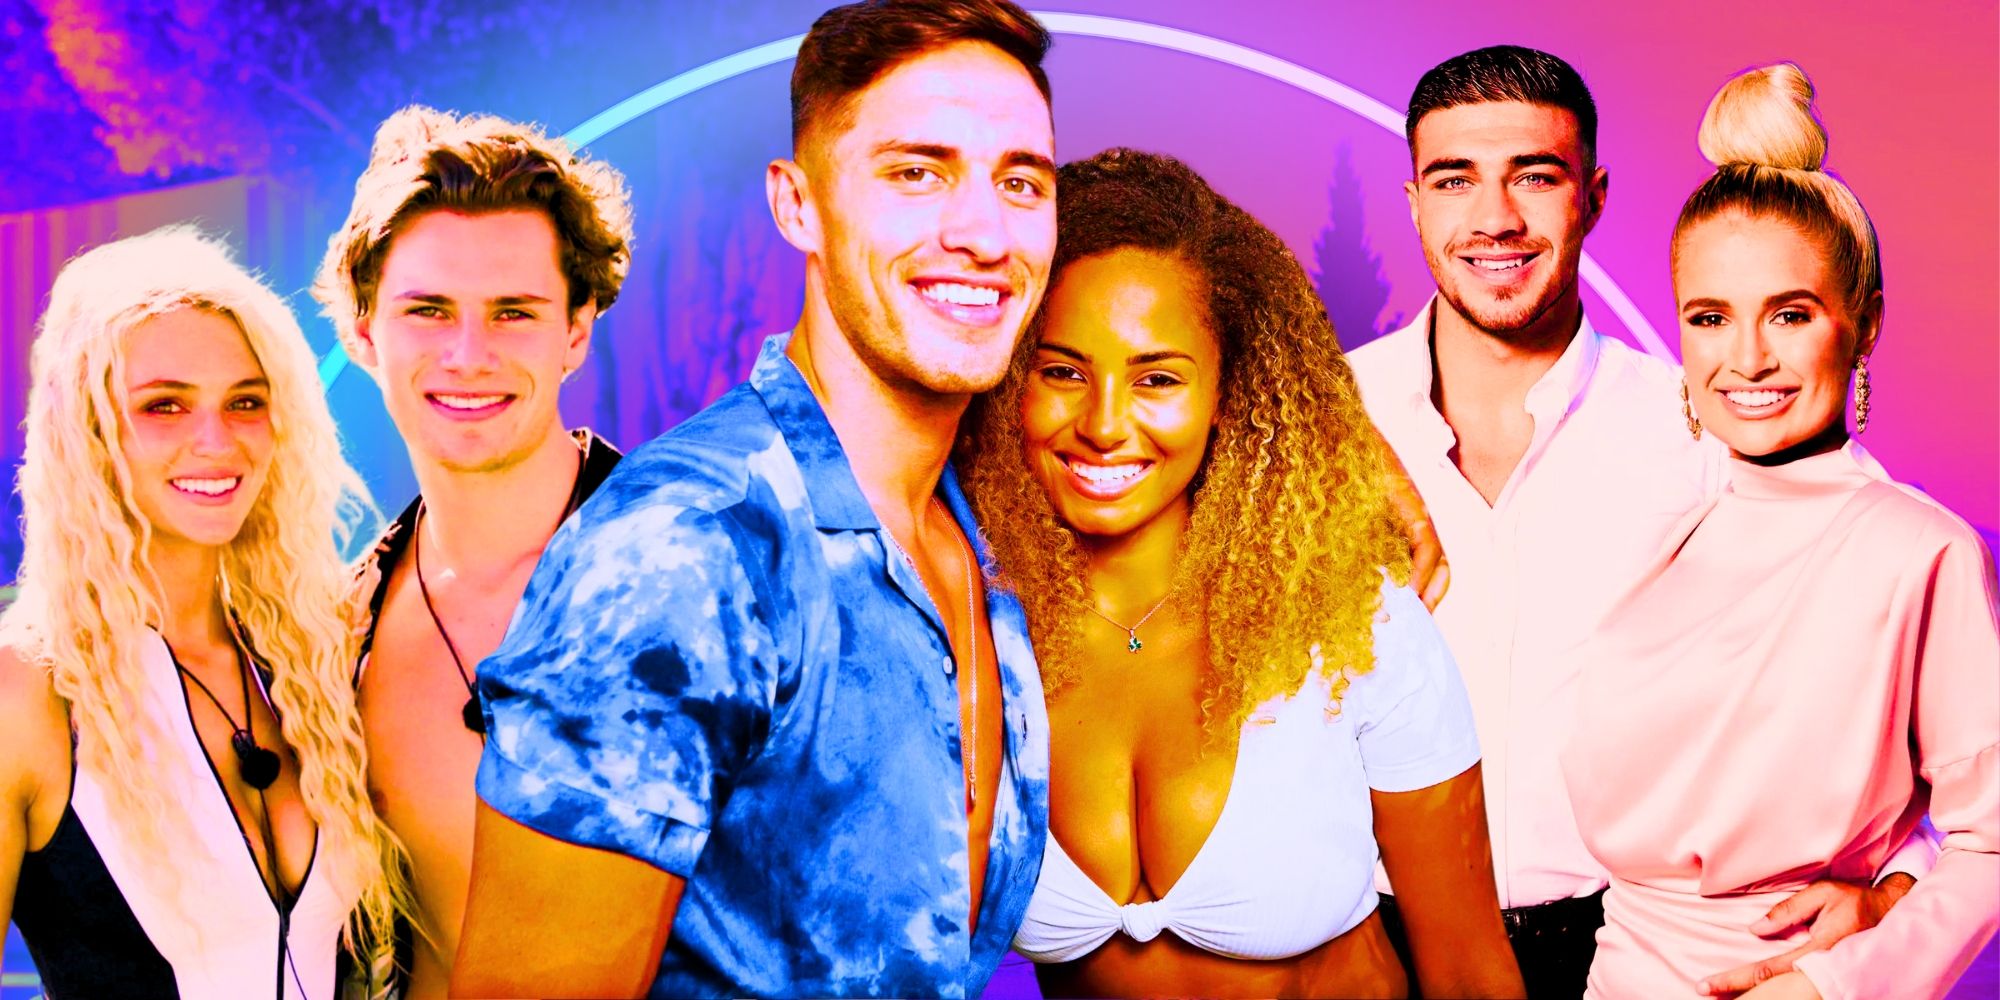 love island uk season 5 montage featuring cast members smiling in pairs with pink background